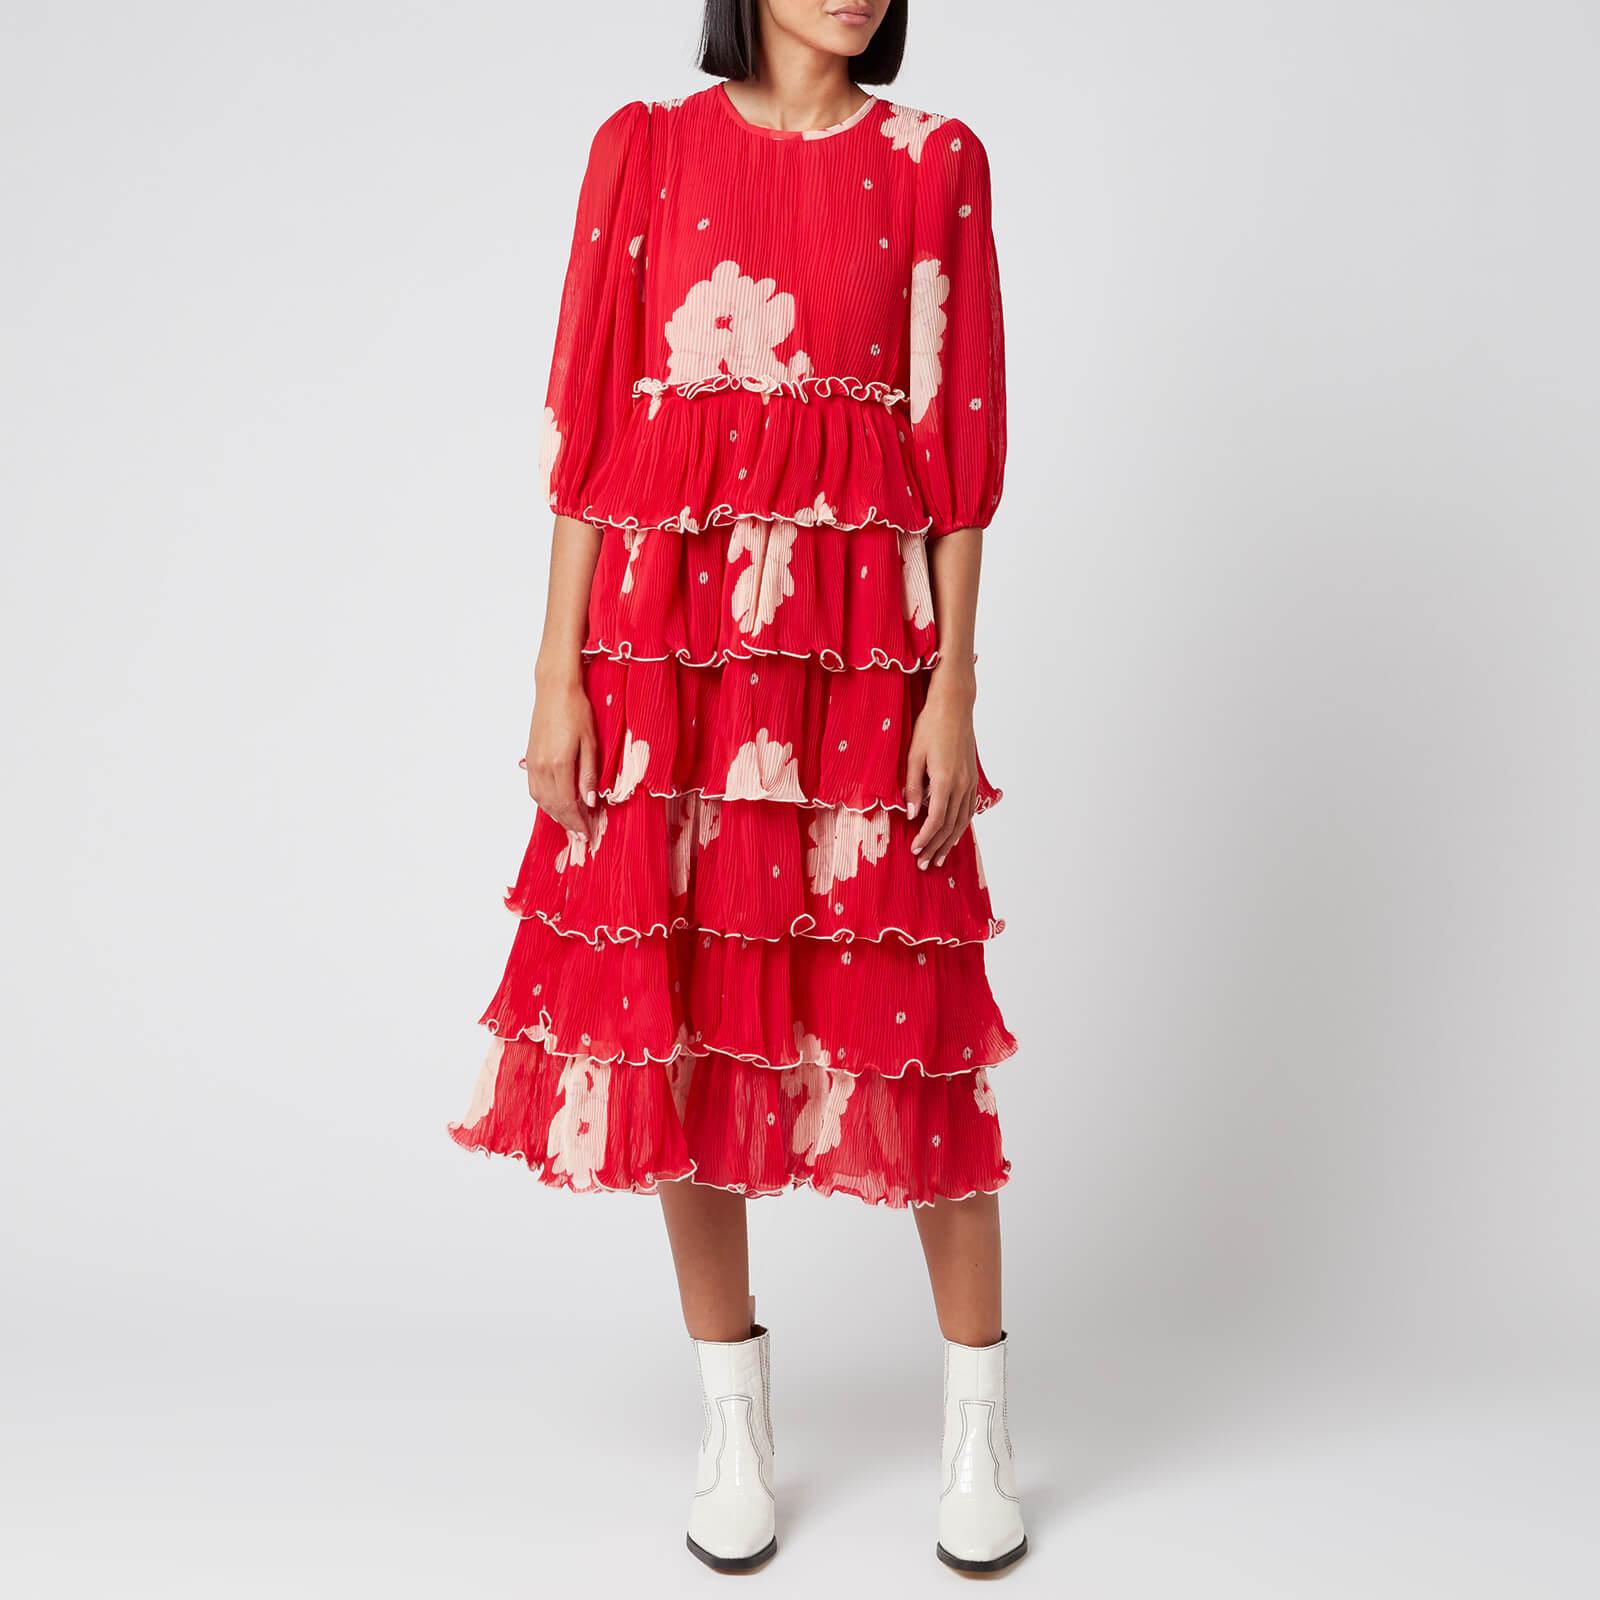 Ganni Synthetic Floral Pleat Georgette Midi Dress in Red - Save 60% - Lyst